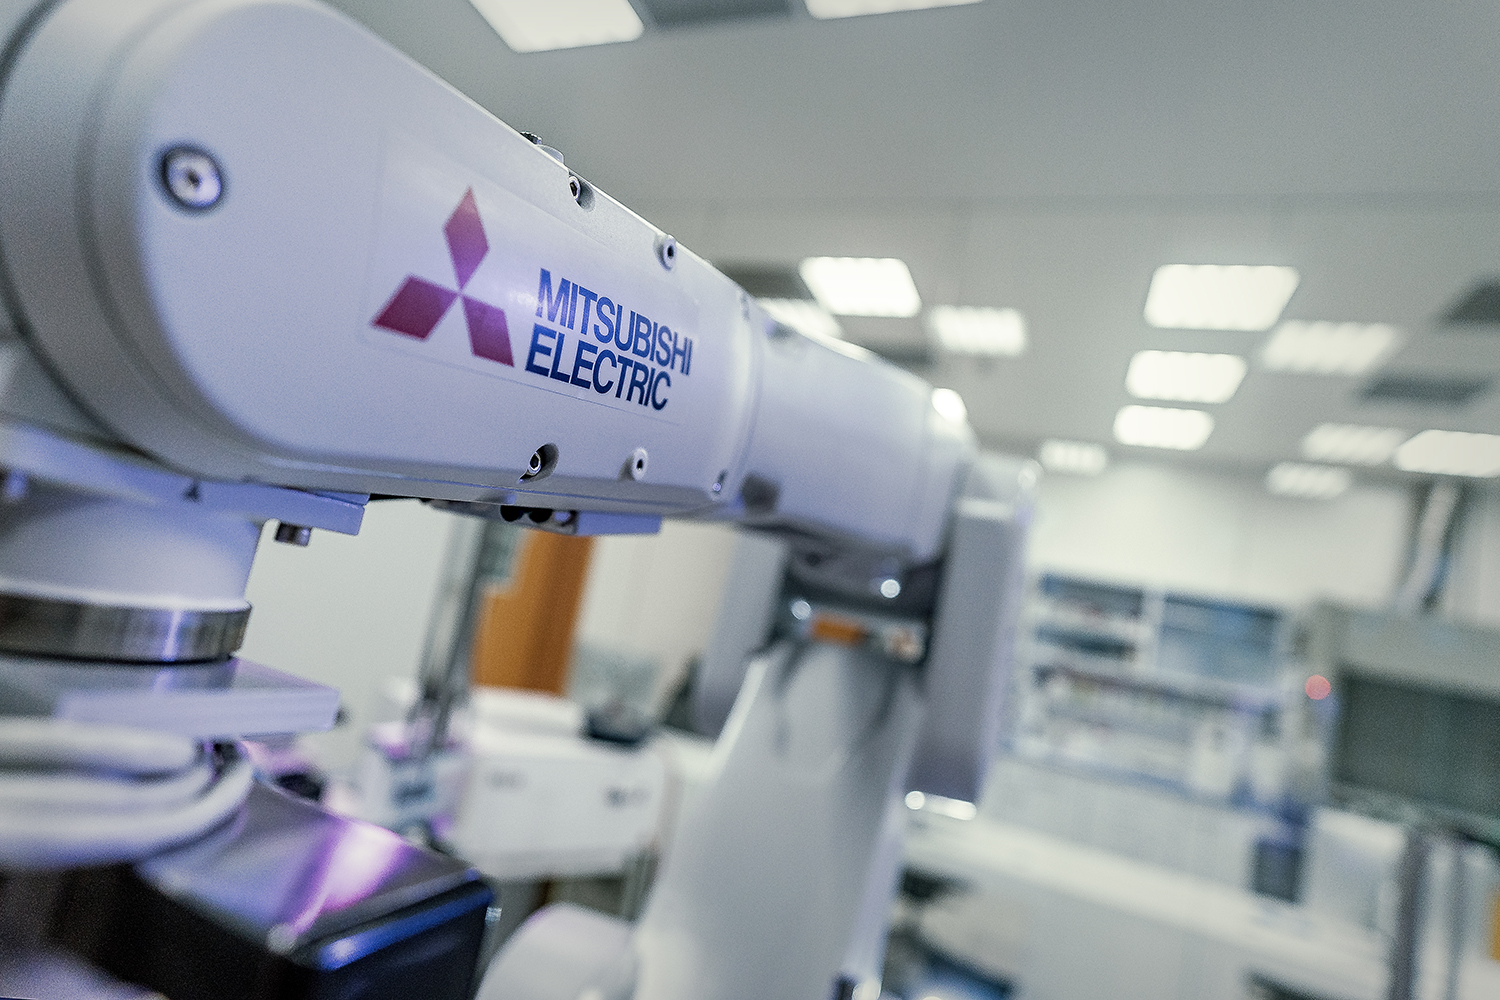 Mitsubishi Electric's industrial robot offers a long arm reach as well as an integrated set of robot-controlled tools for micro-scale test series on 96- and 384-well microassay plates. Source: Institute of Bioorganic Chemistry, Polish Academy of Science